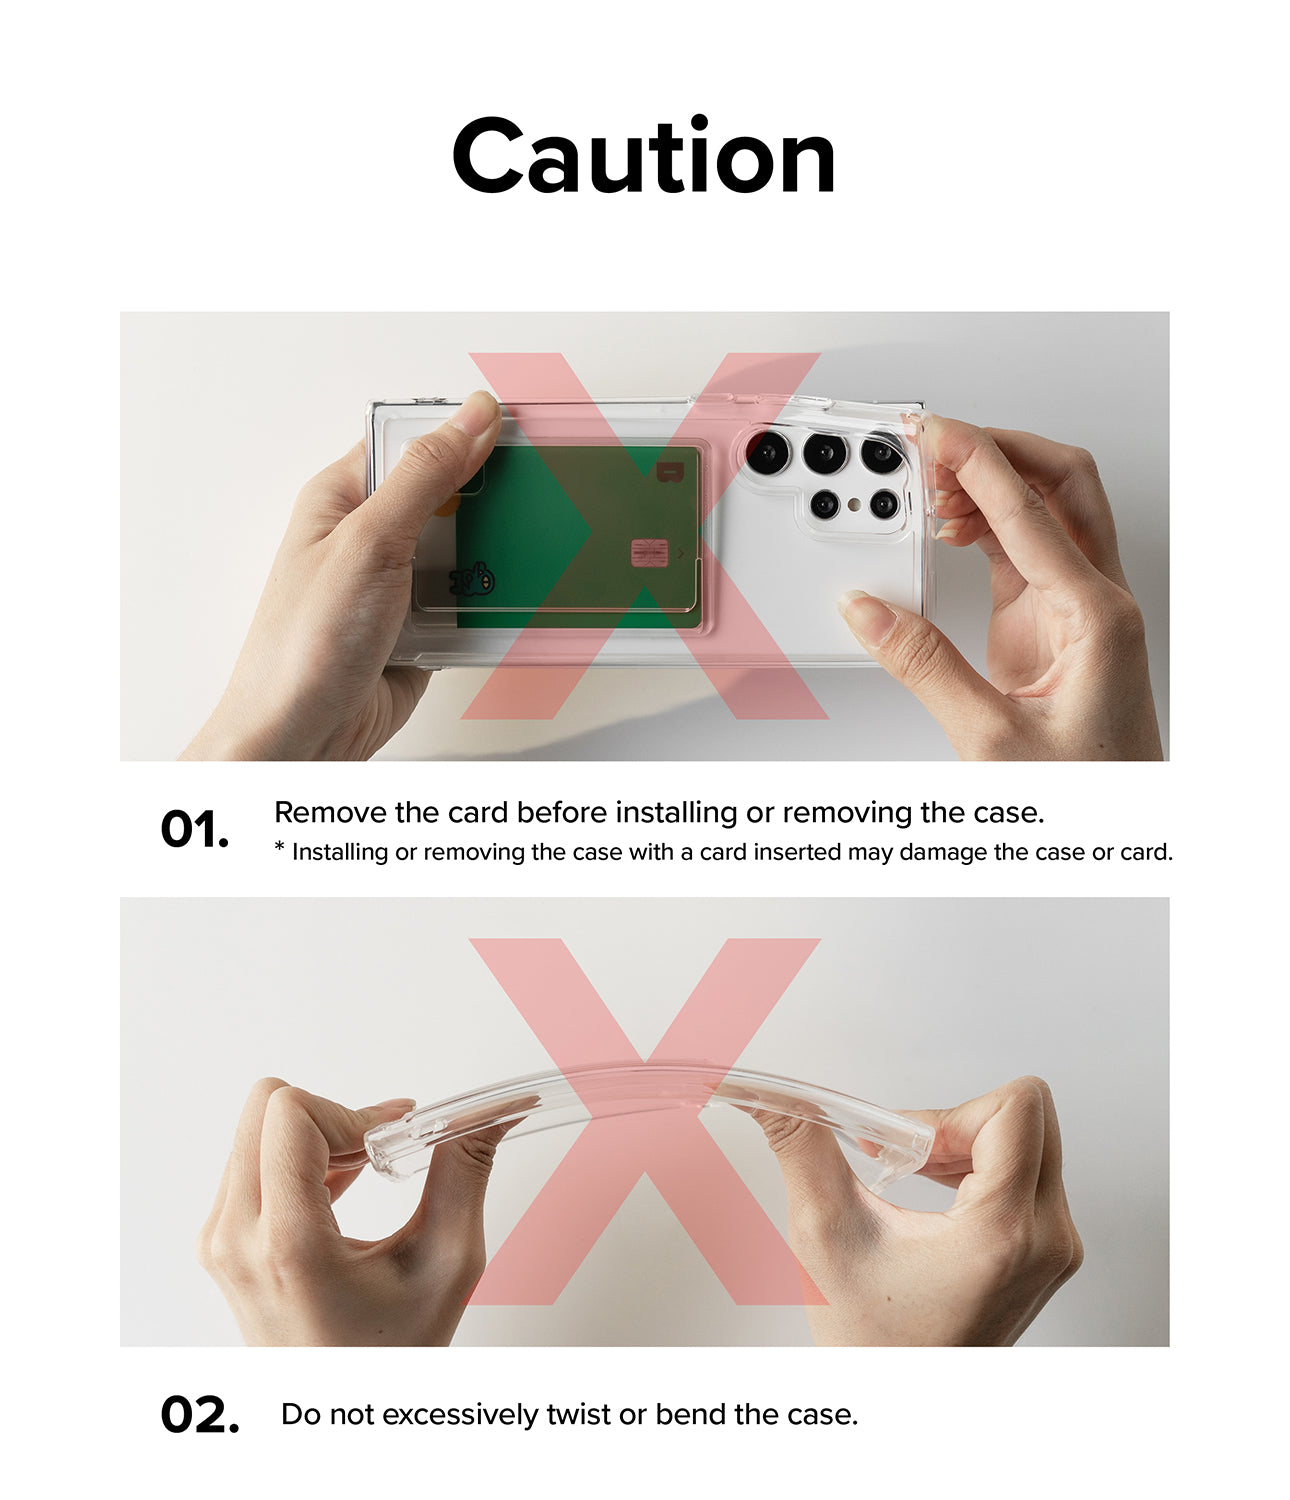 iPhone 13 Pro Case | Fusion Card - Caution. Remove the card before installing or removing the case. Installing or removing the case with a card inserted may damage the case or card. Do not excessively twist or bend the case.